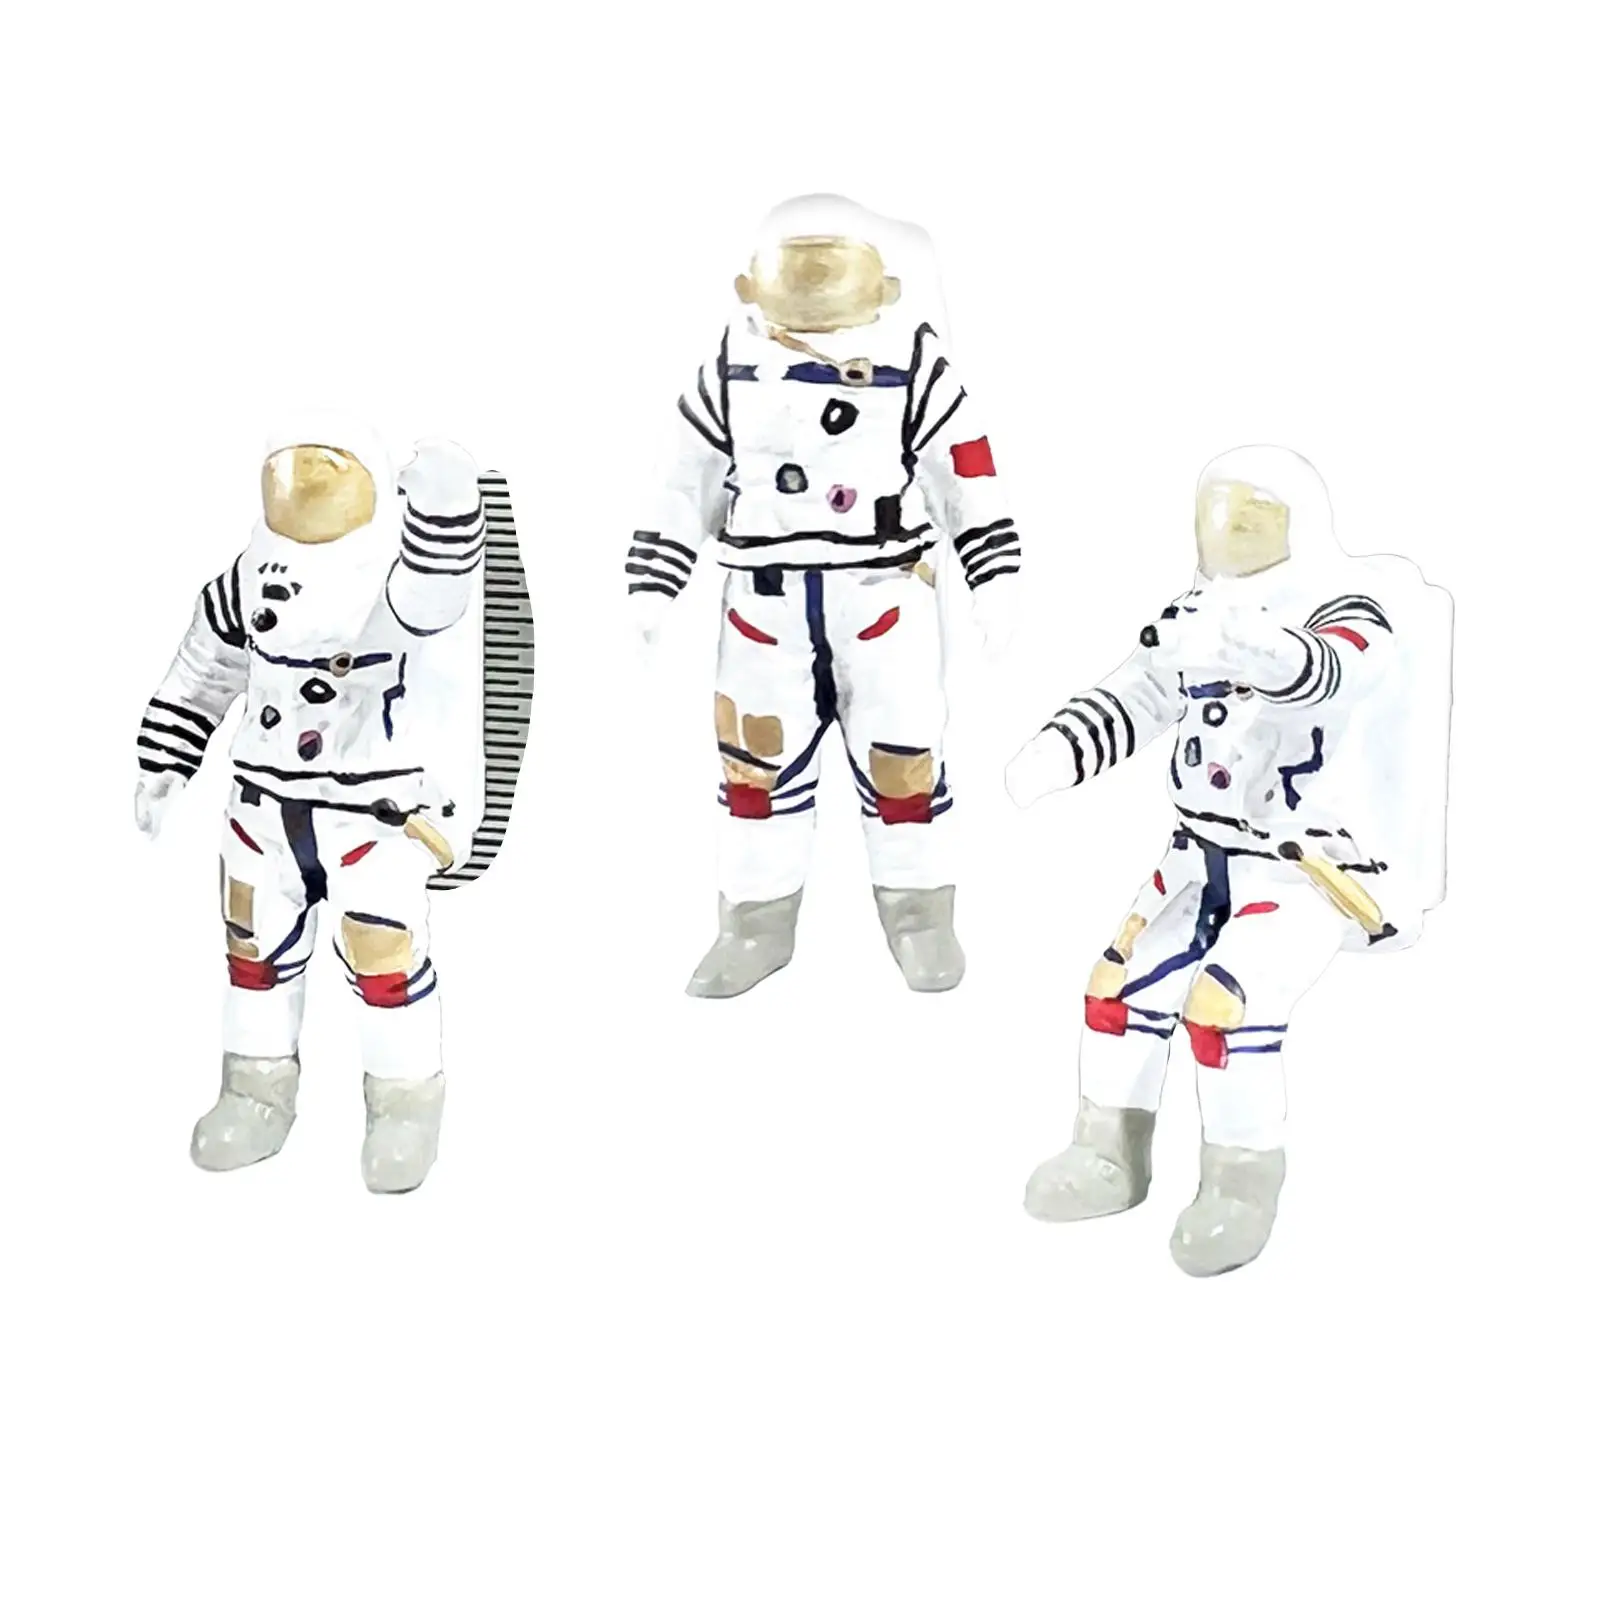 3Pcs 1/64 Scale Astronaut Figurines Collection Mini Astronaut Toys for Photography Props Dollhouse Micro Landscapes Ornament